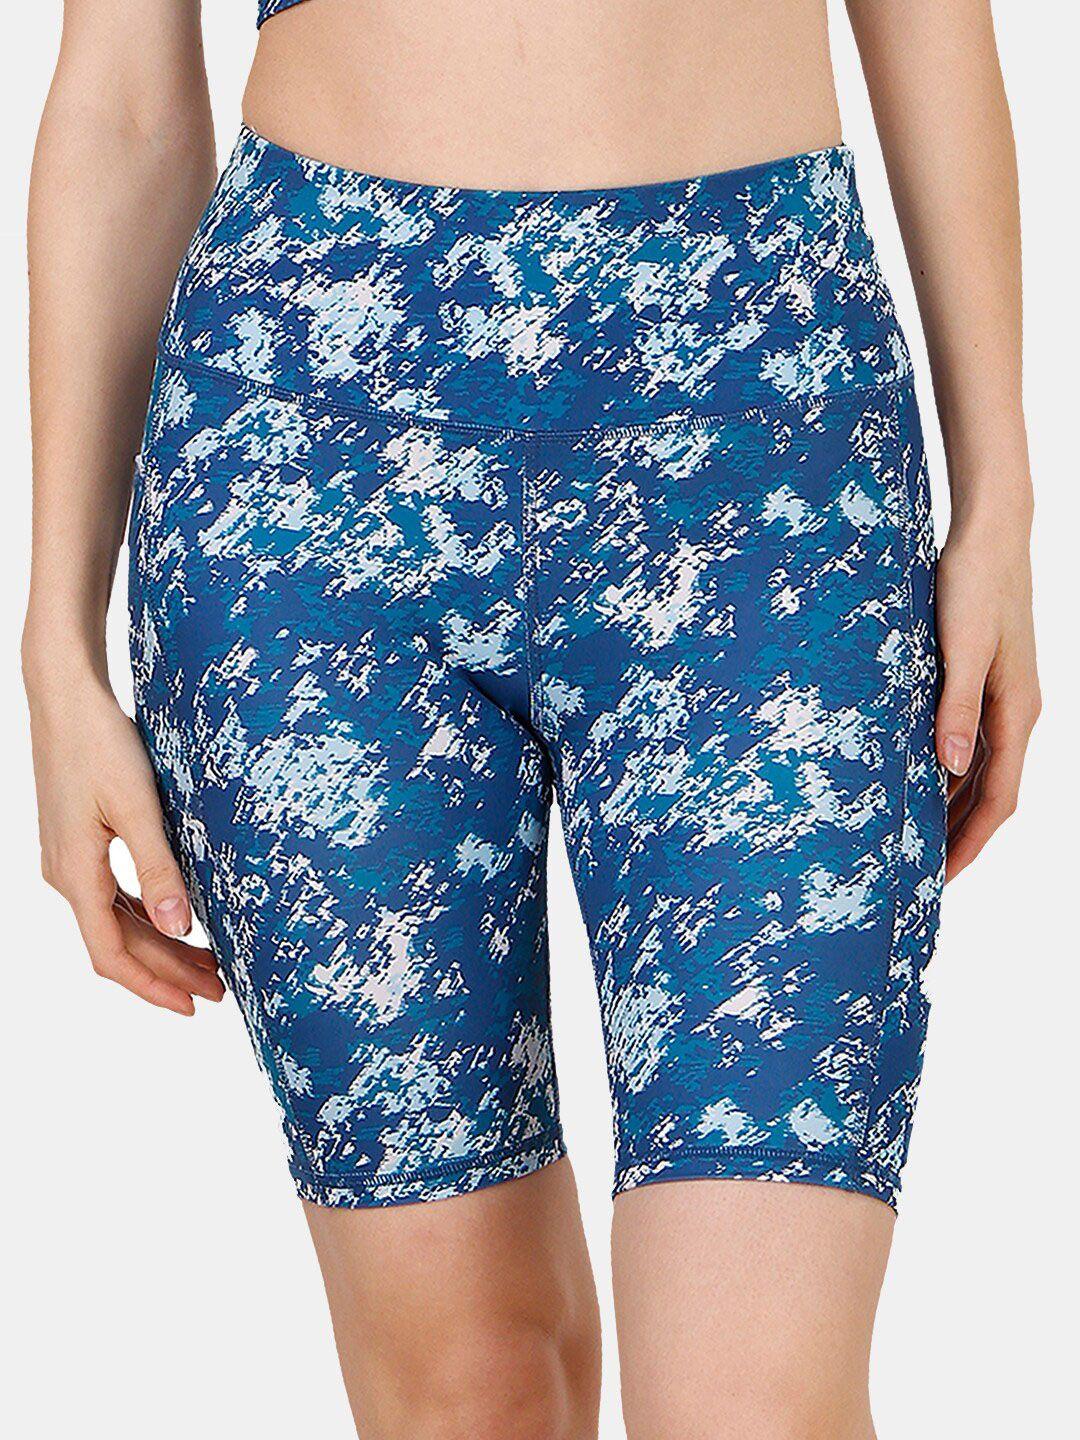 soie-women-printed-skinny-fit-quick-dry-training-or-gym-sports-shorts